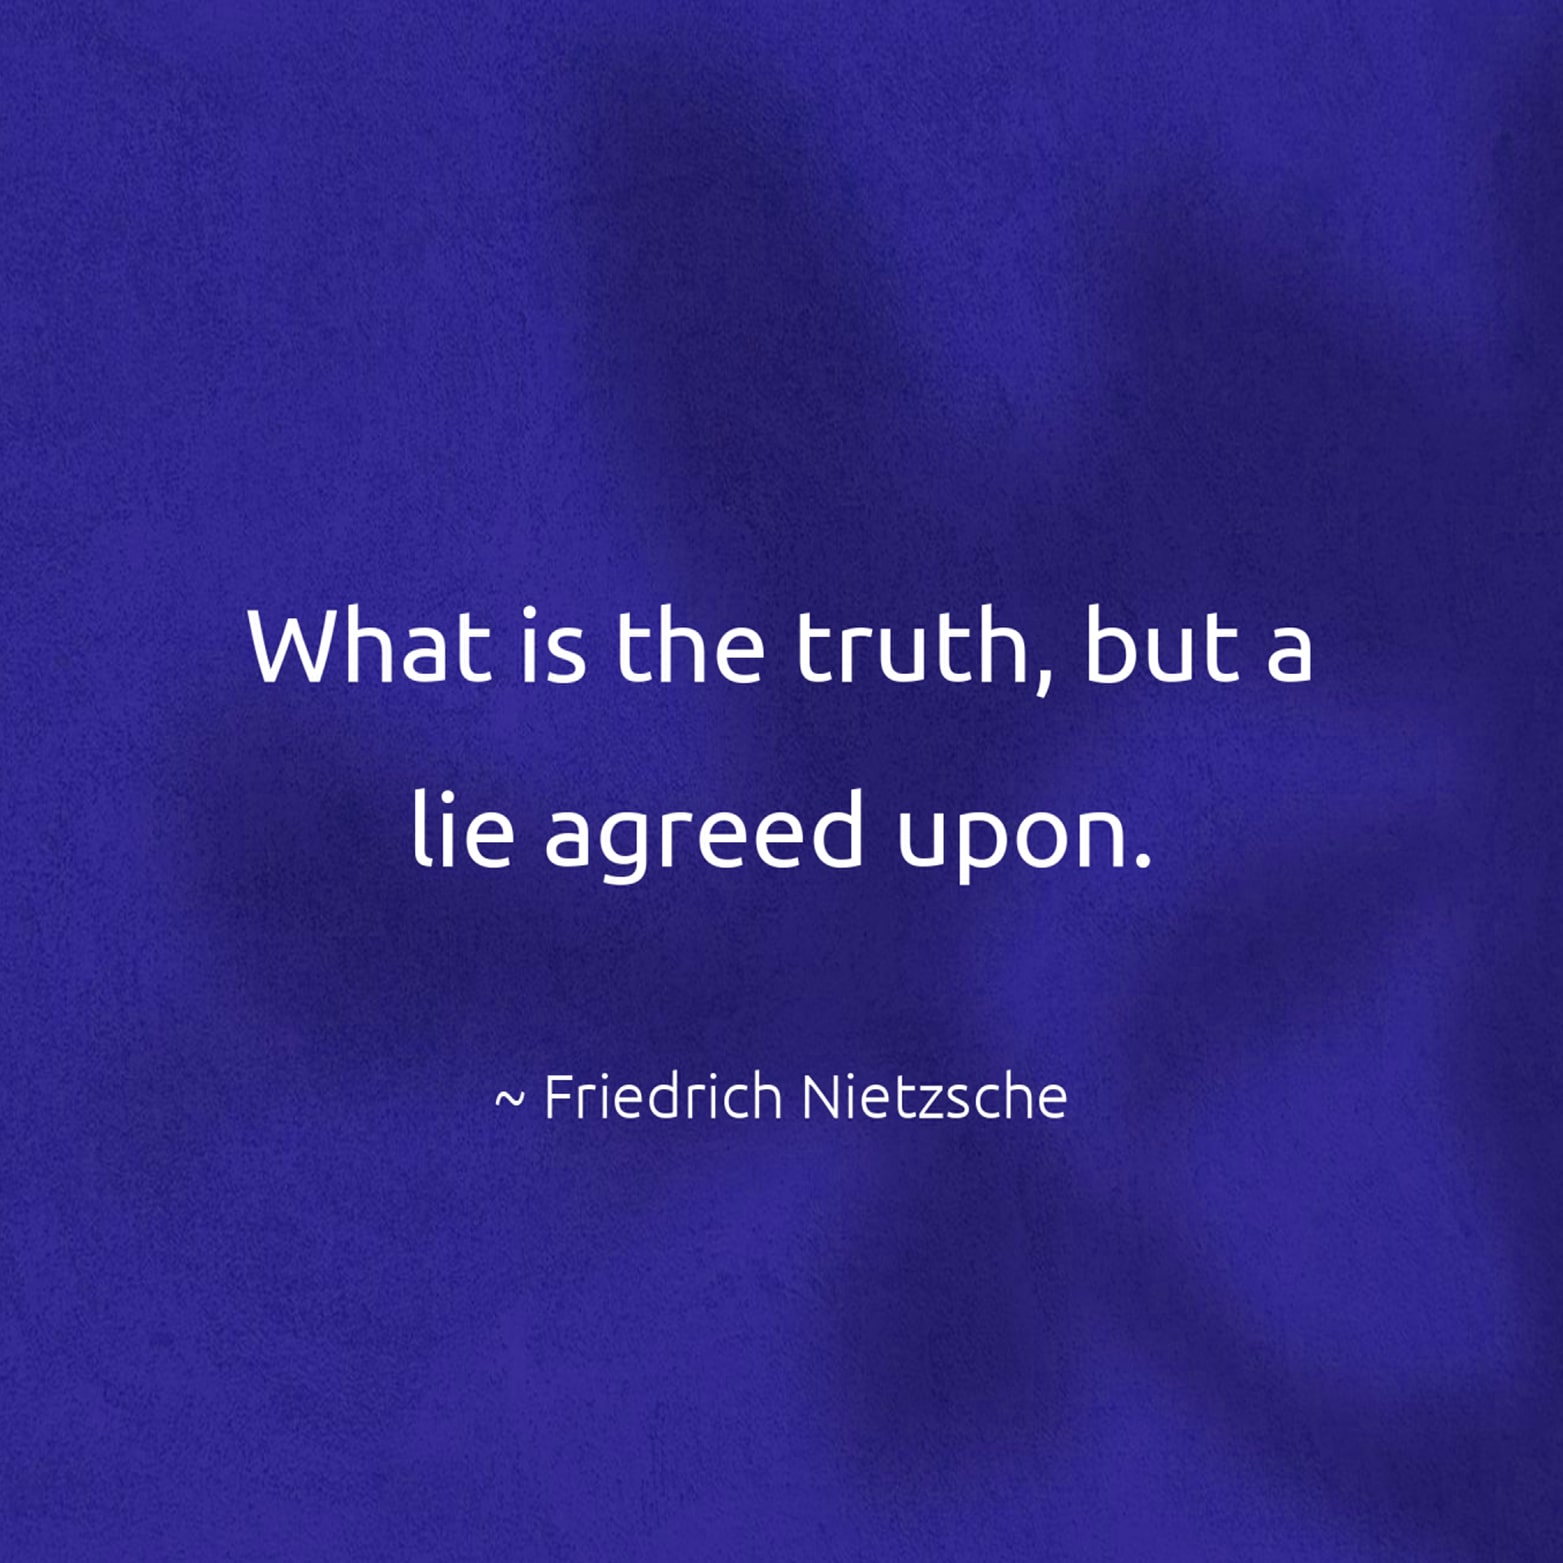 What is the truth, but a lie agreed upon. - Friedrich Nietzsche